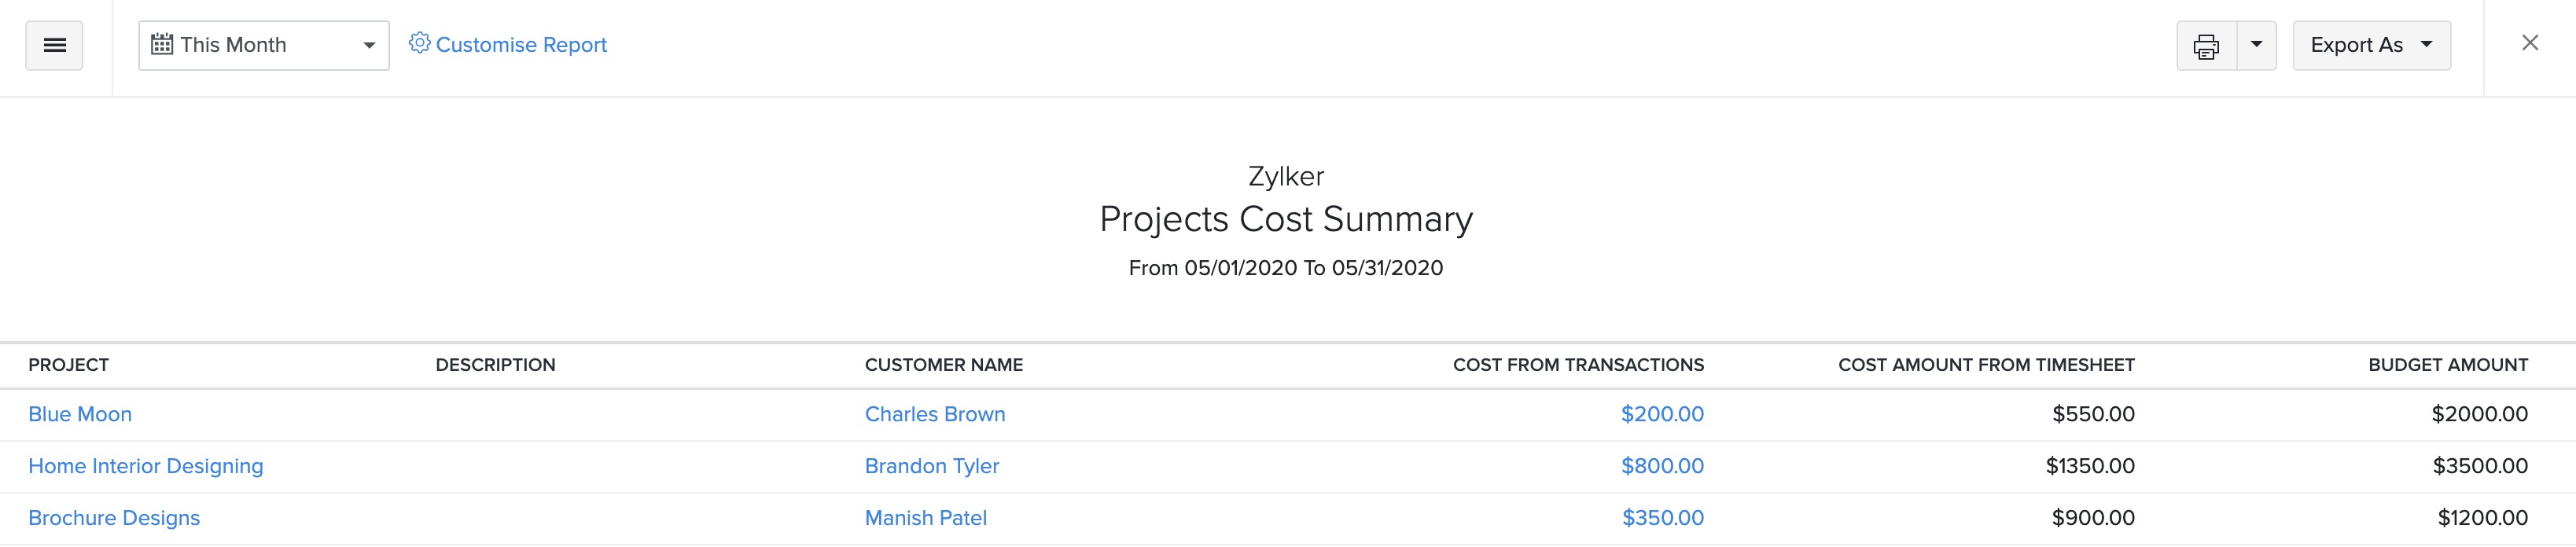 Project Cost Summary Report